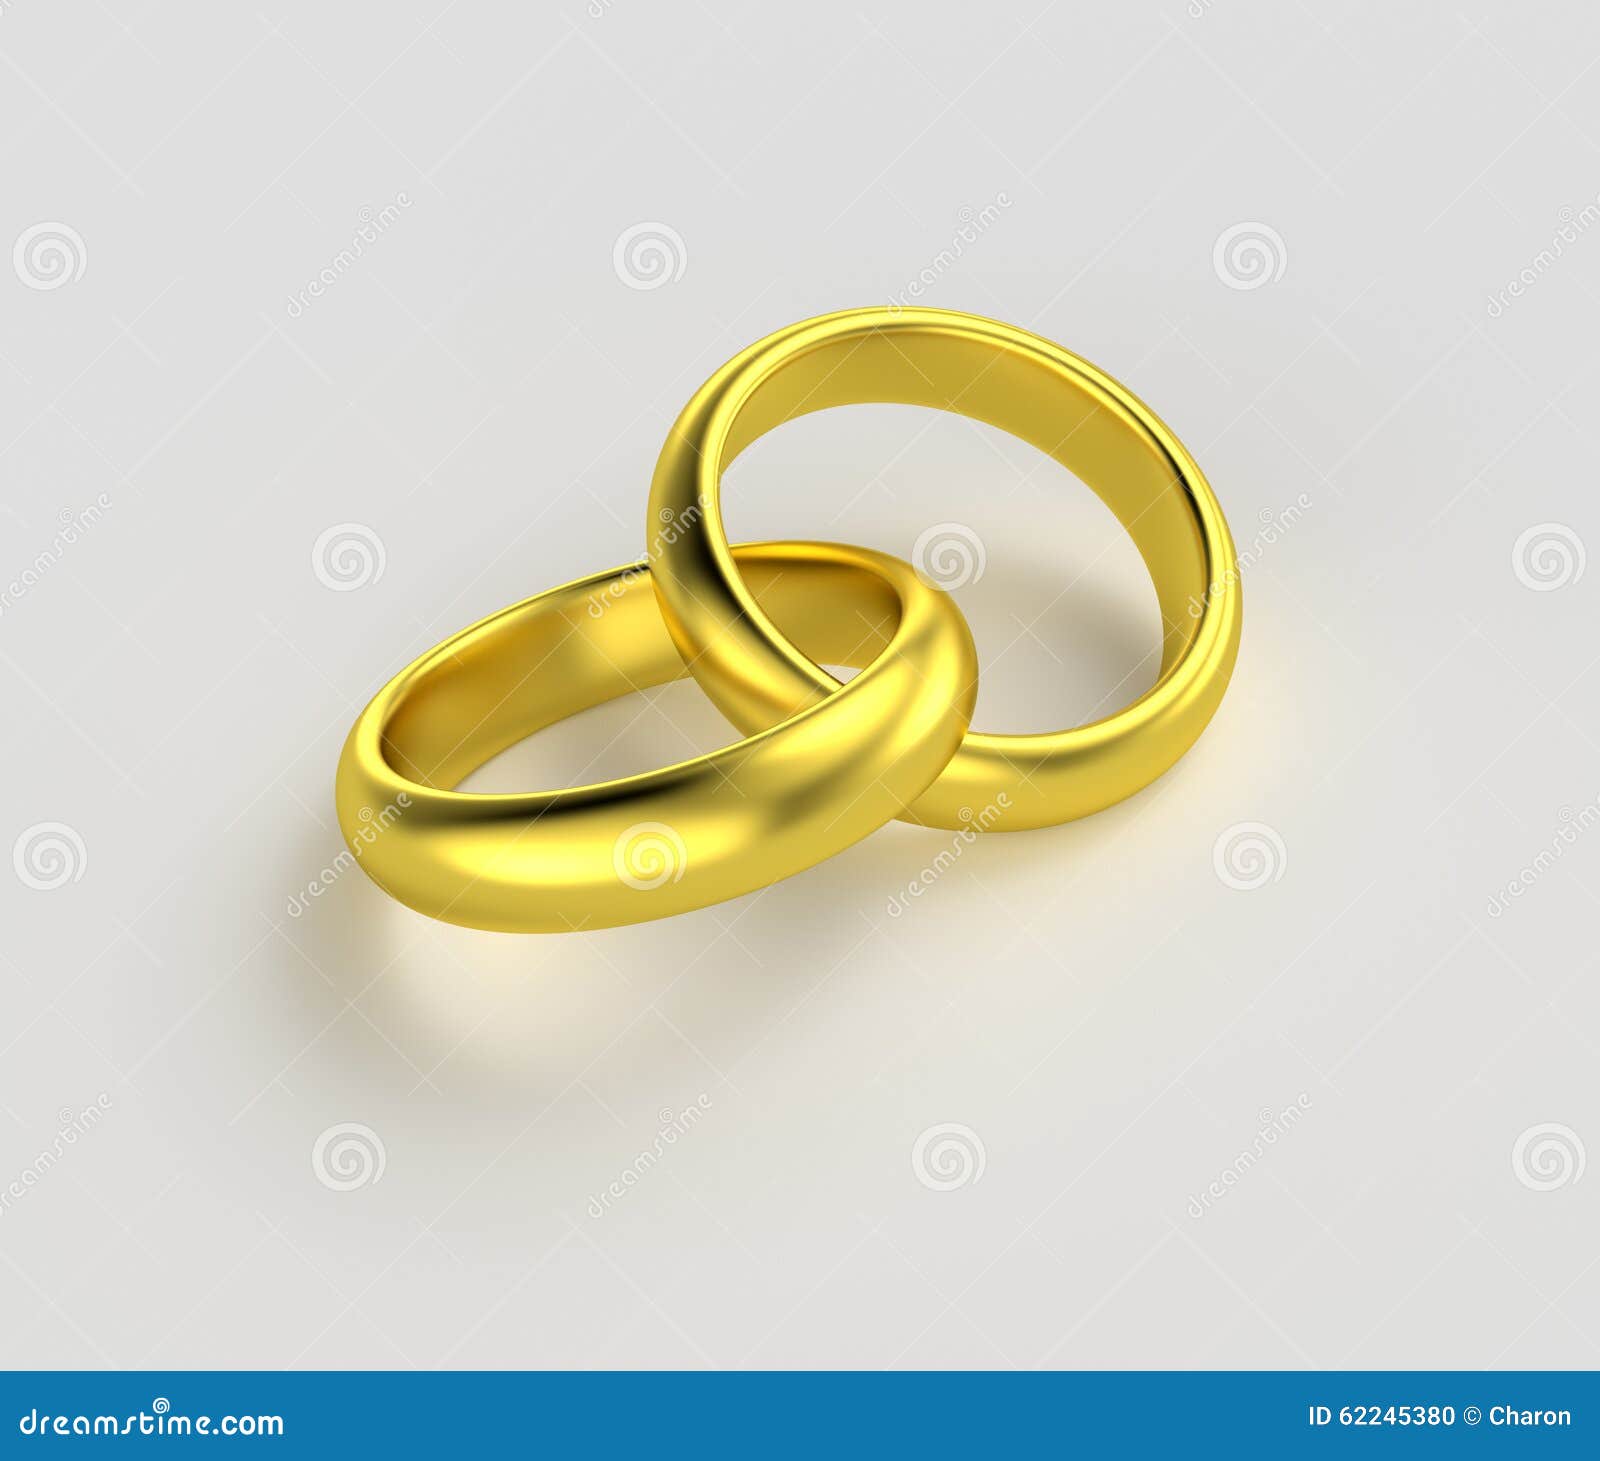  Connected  Gold Rings  Isolated Stock Illustration Image 